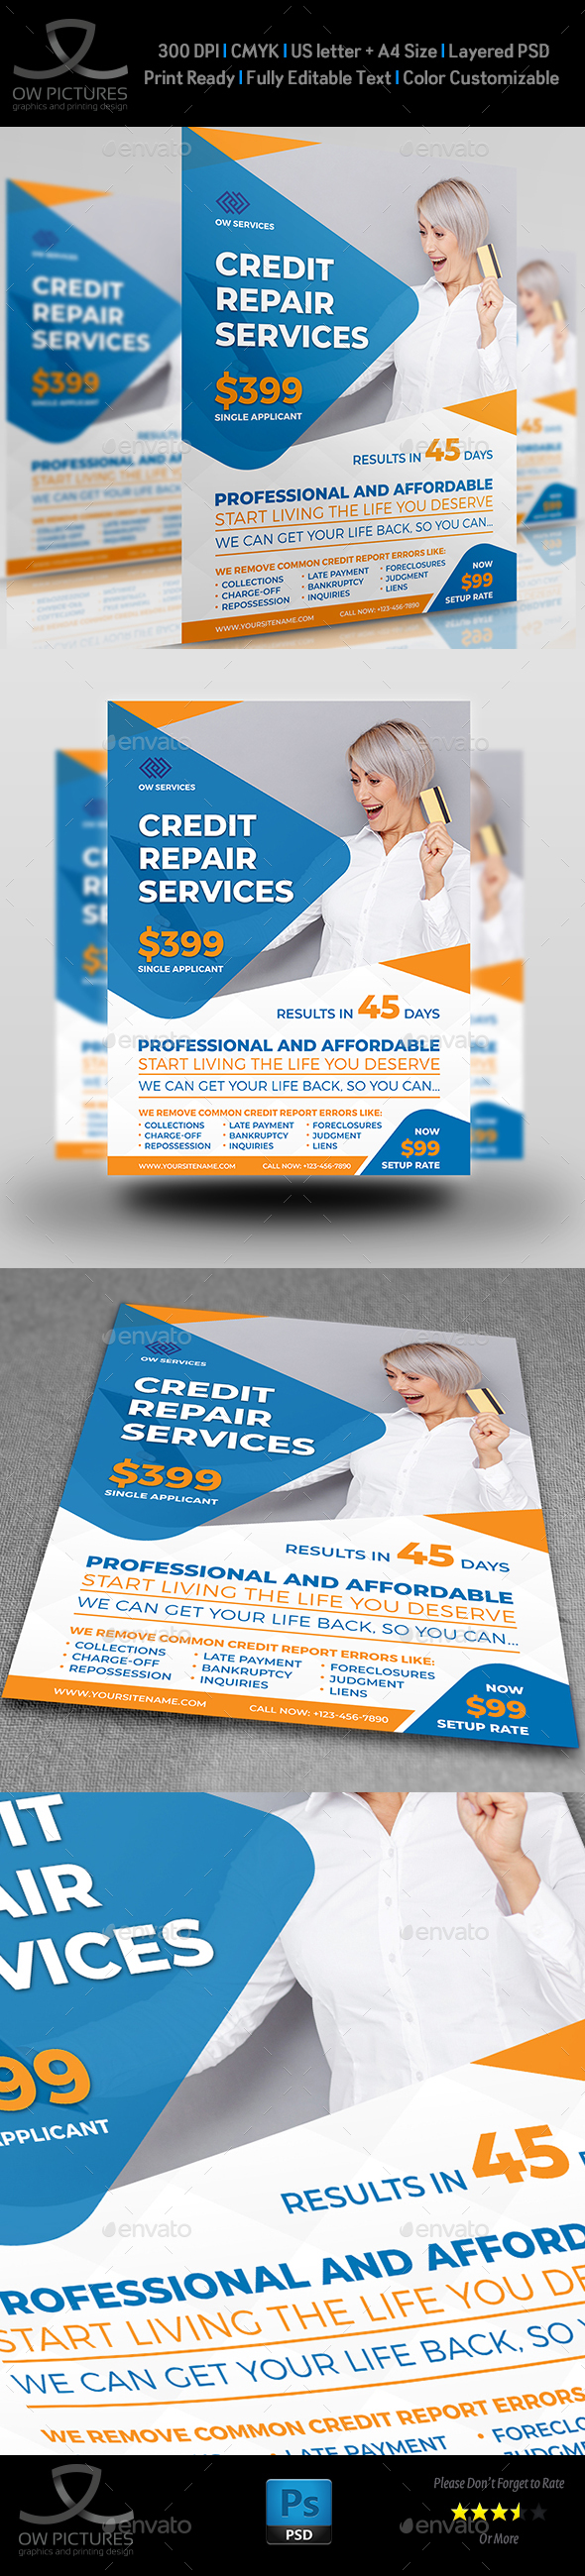 Credit Repair Services Flyer Template